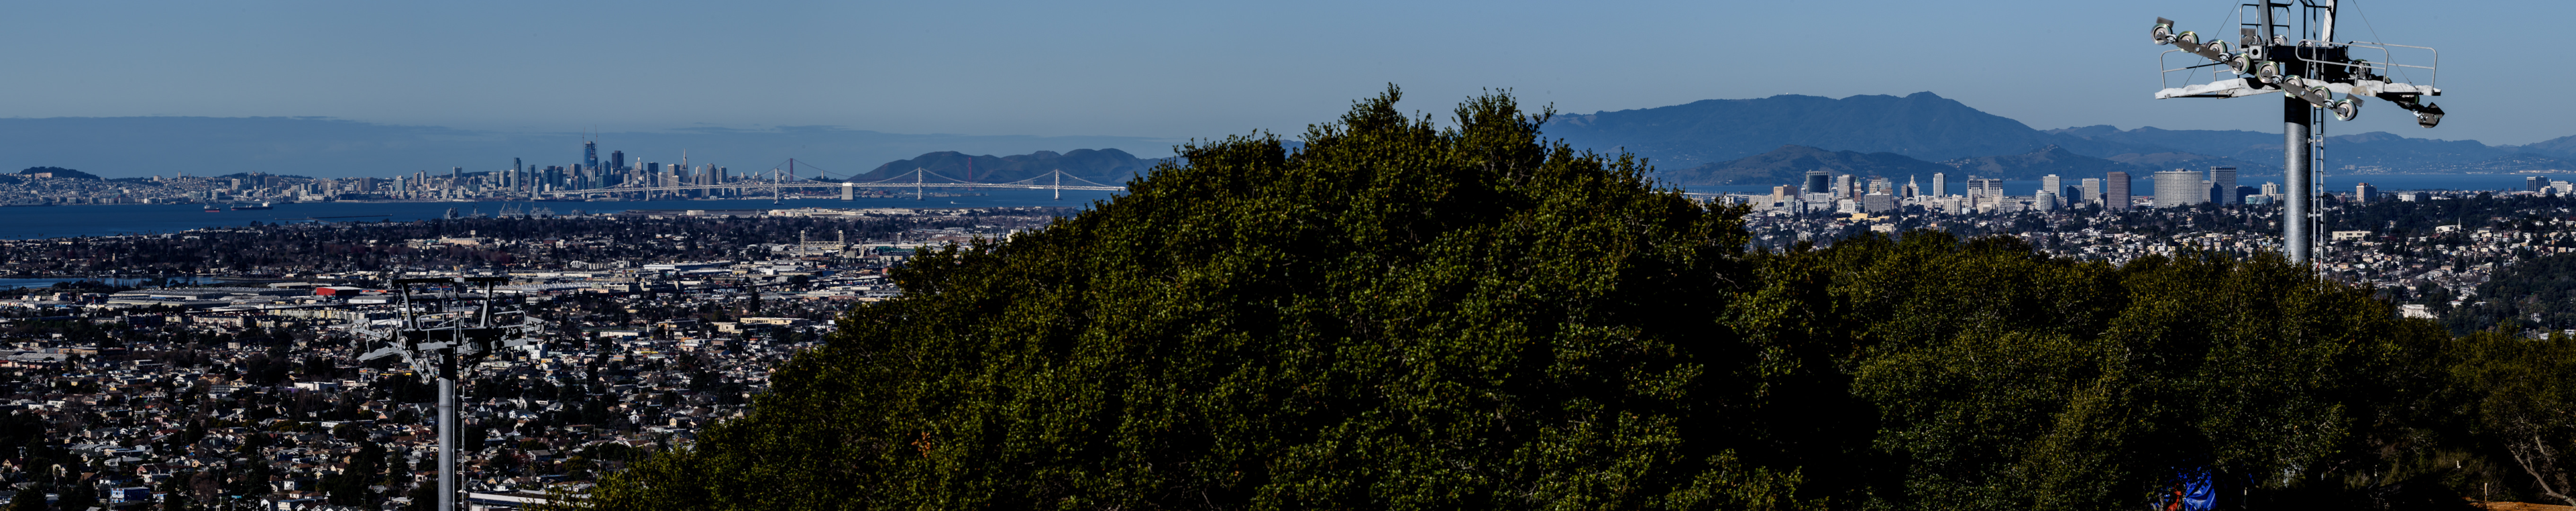 Bison Overlook's view of Oakland city, the Bay Bridge, and San Francisco in the background